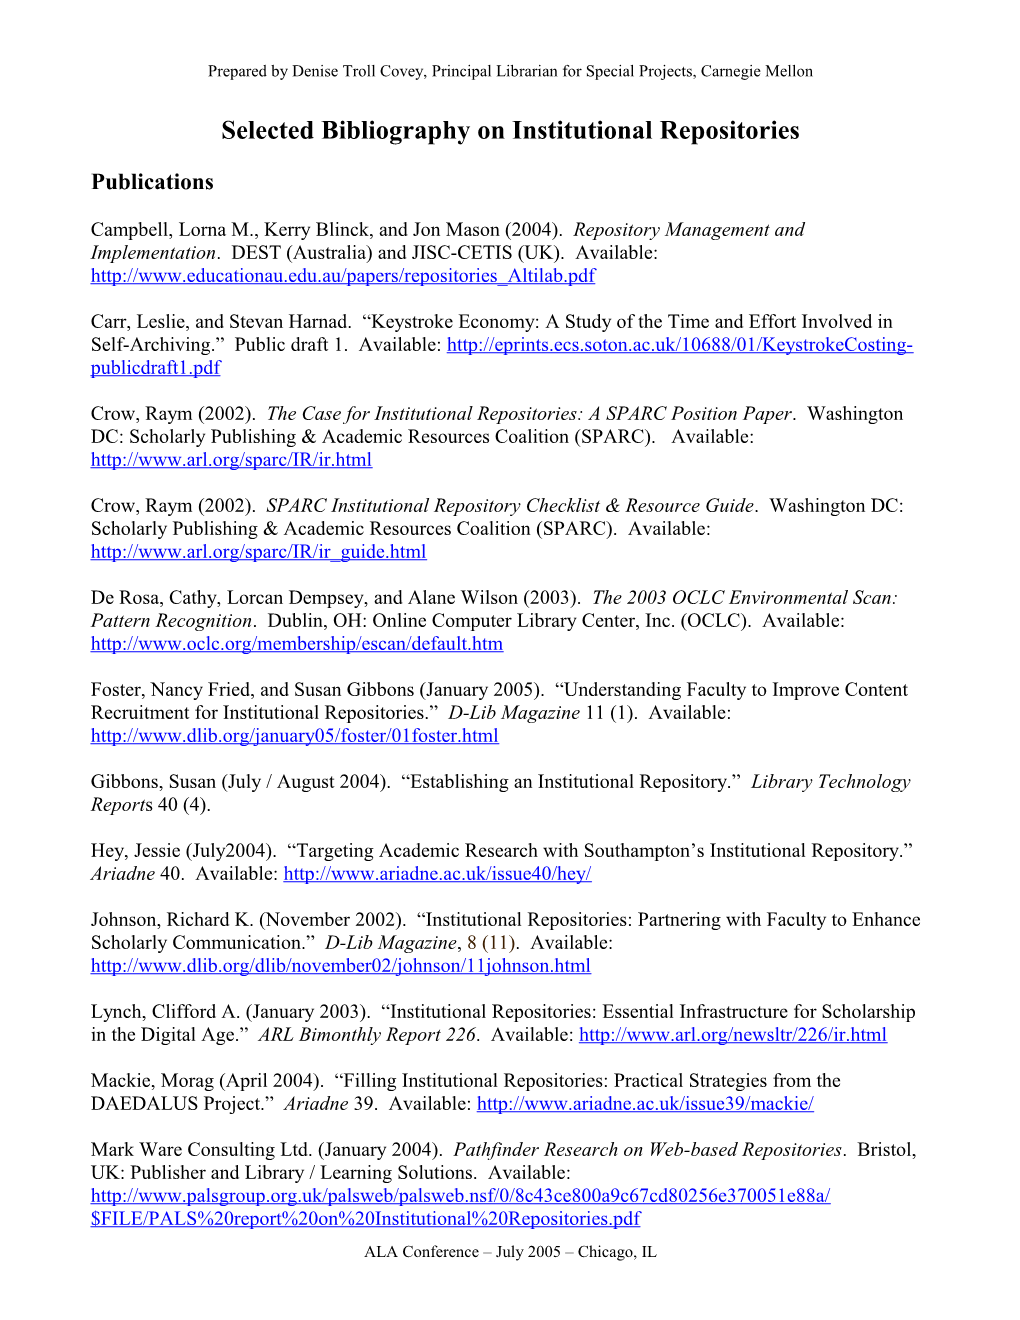 Selected Bibliography on Institutional Repositories